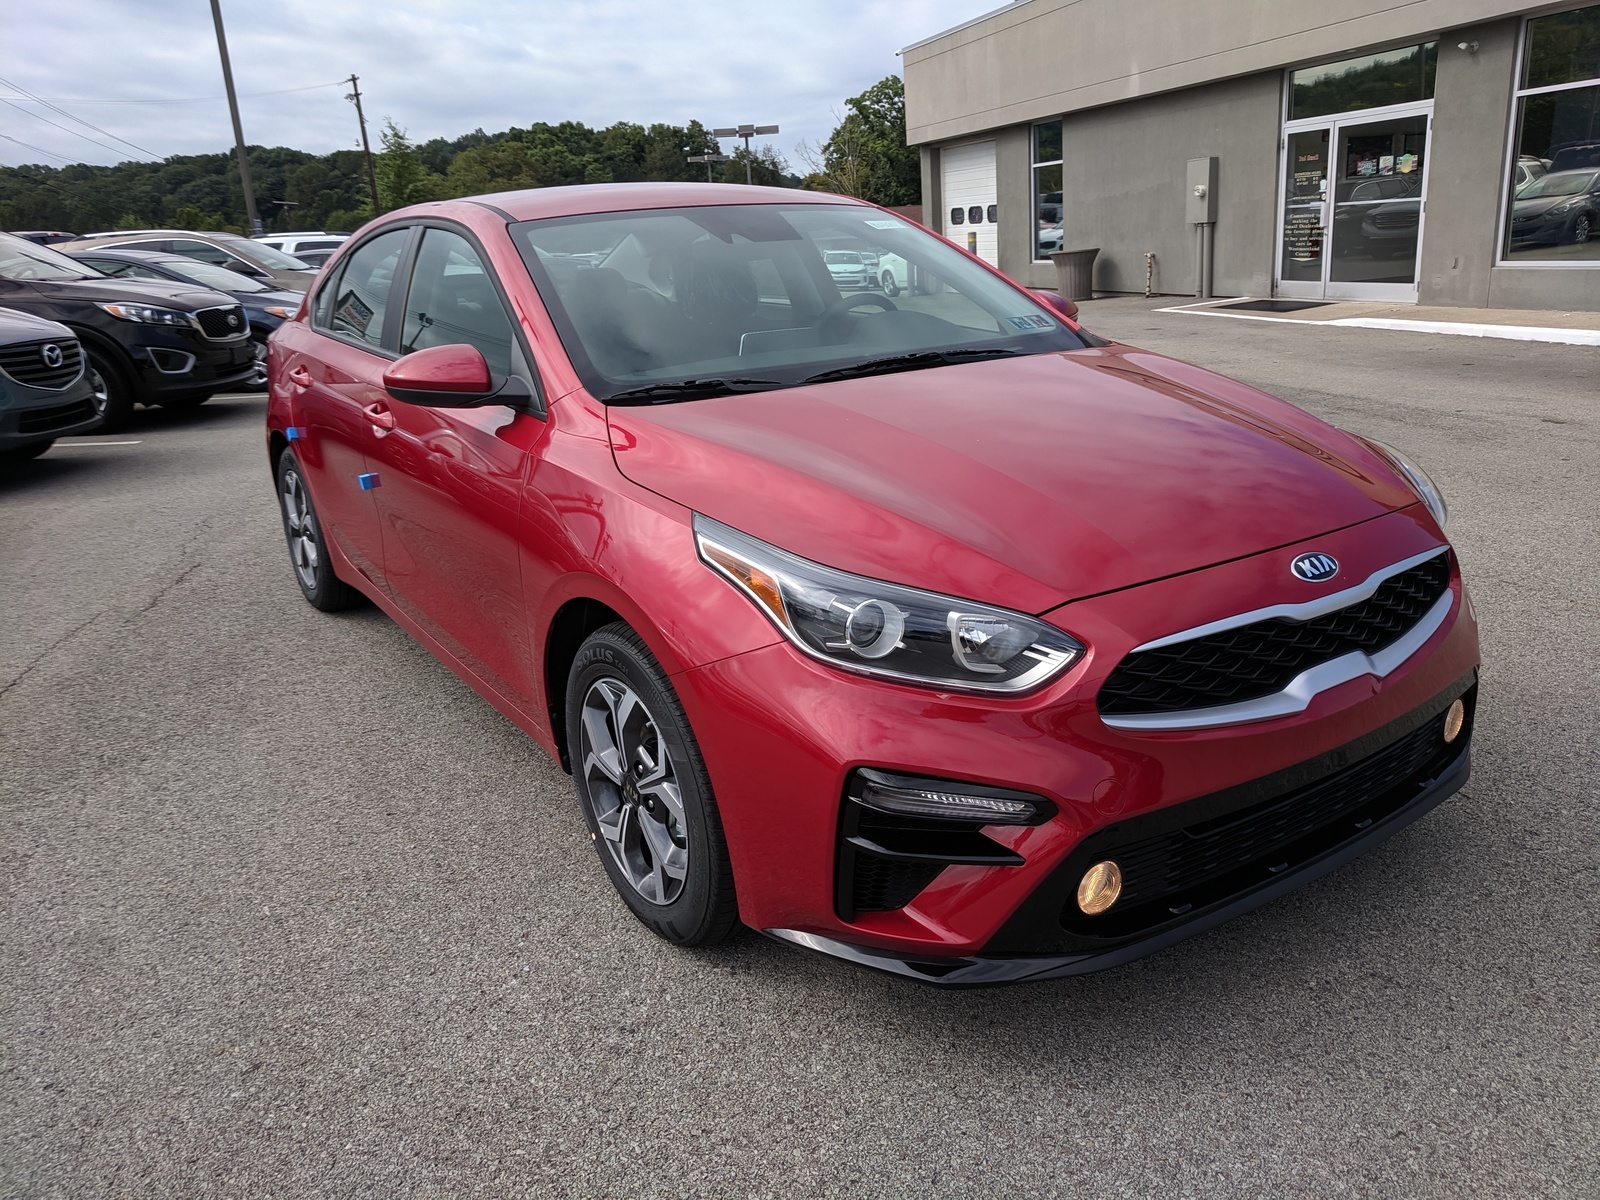 New 2020 Kia Forte LXS in Currant Red | Greensburg, PA | #K04028